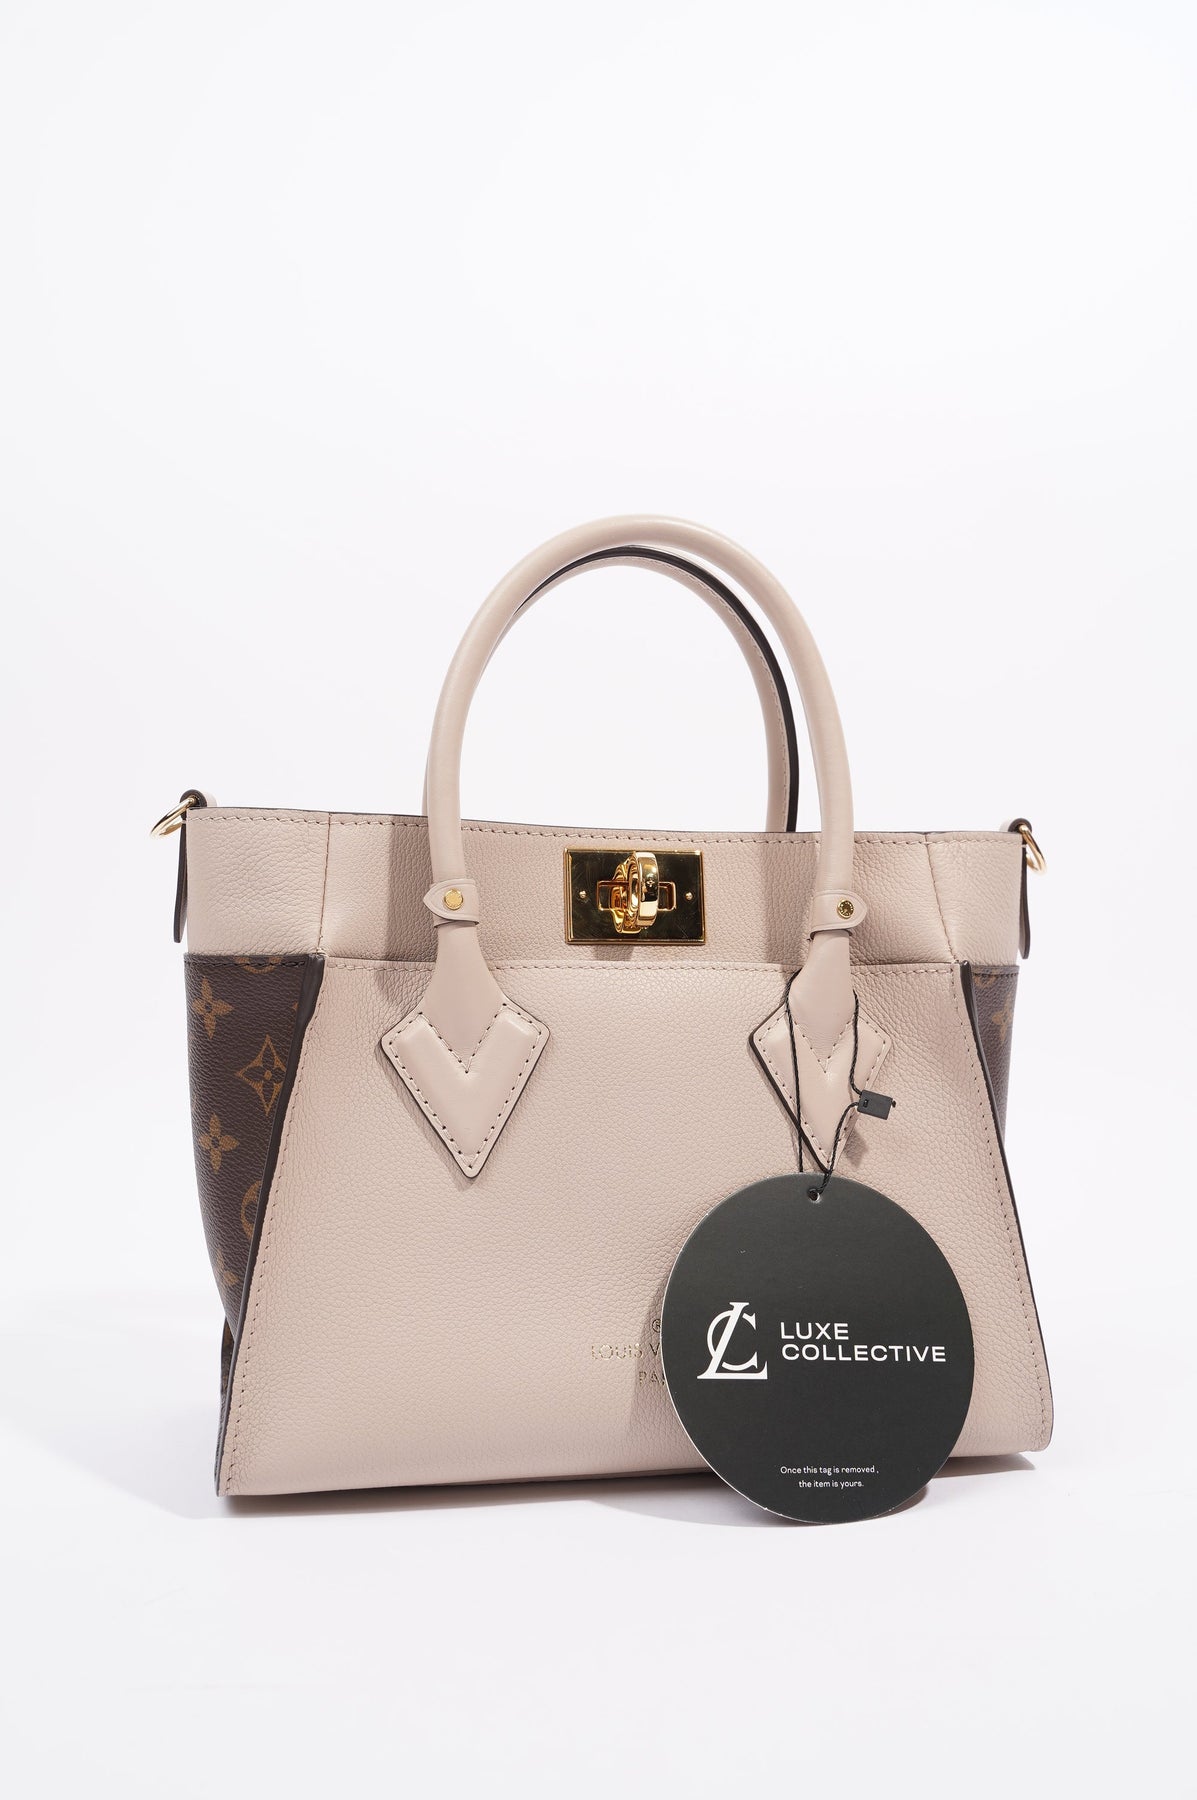 Louis Vuitton - On My Side PM Tote Bag - Greige - Monogram Canvas & Leather - Women - Luxury